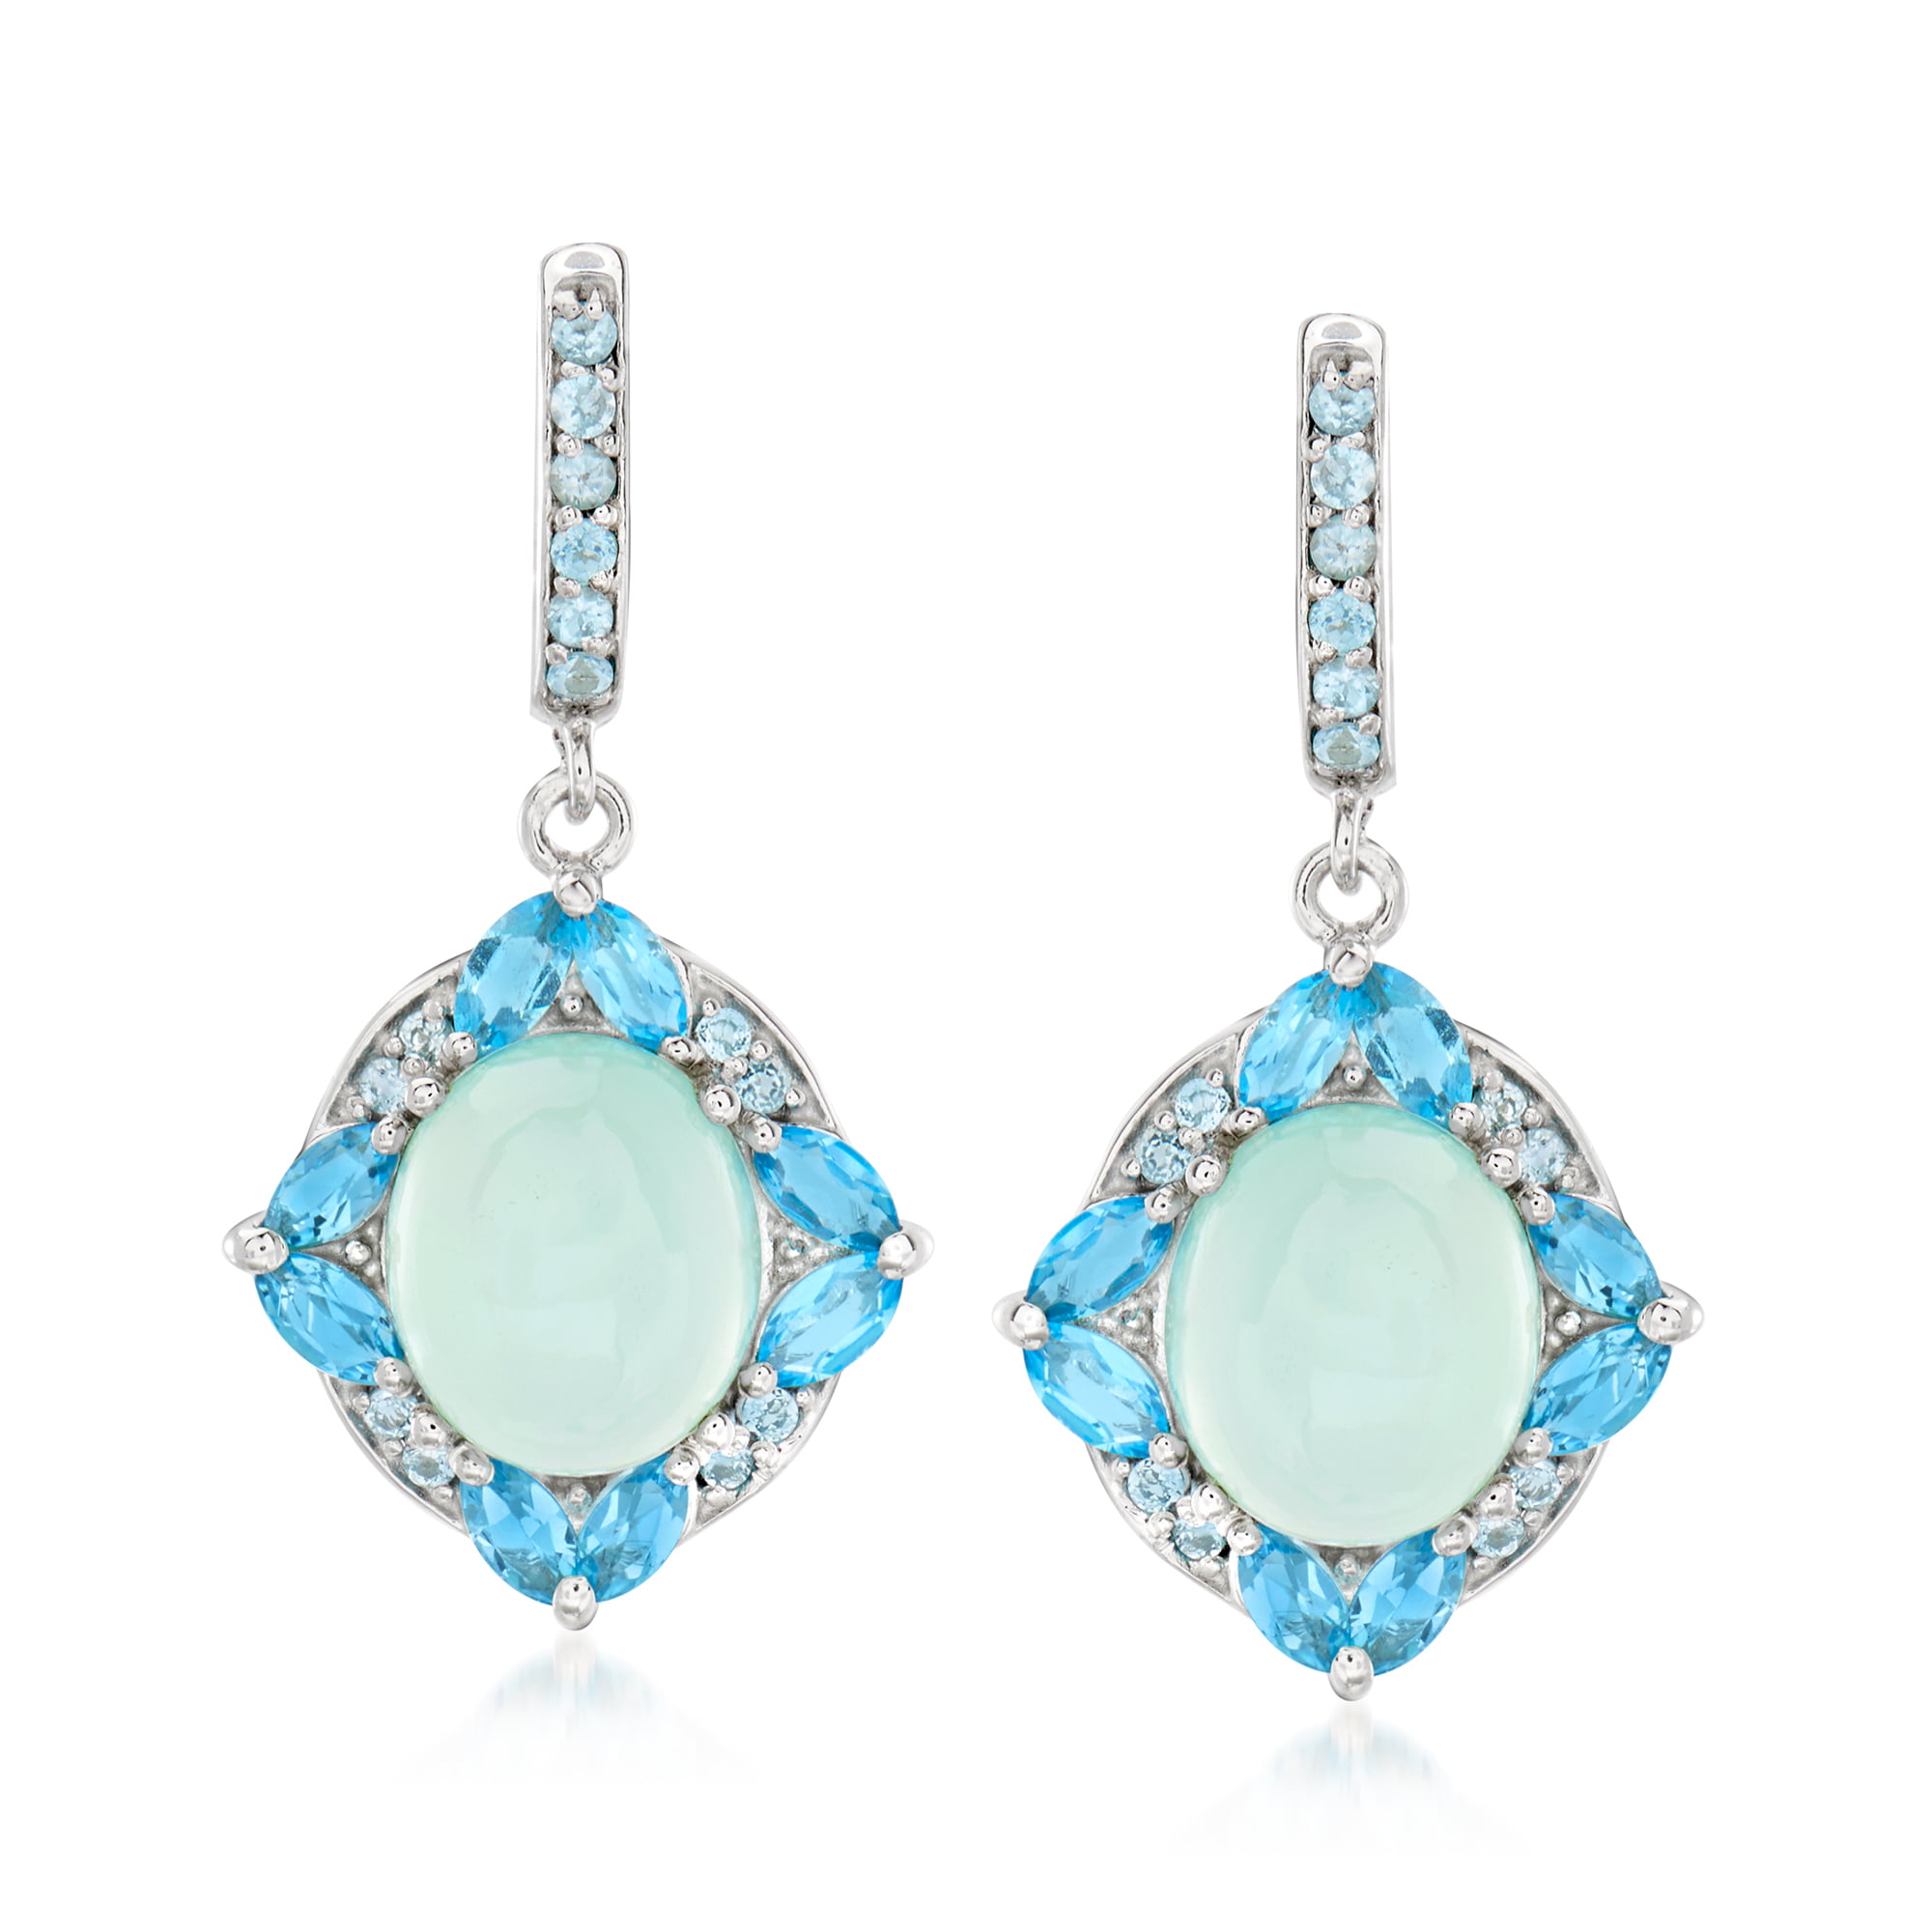 Details about   White Chalcedony 18K Gold Plated Sterling Silver Drop Earrings Gemstone Jewelry 